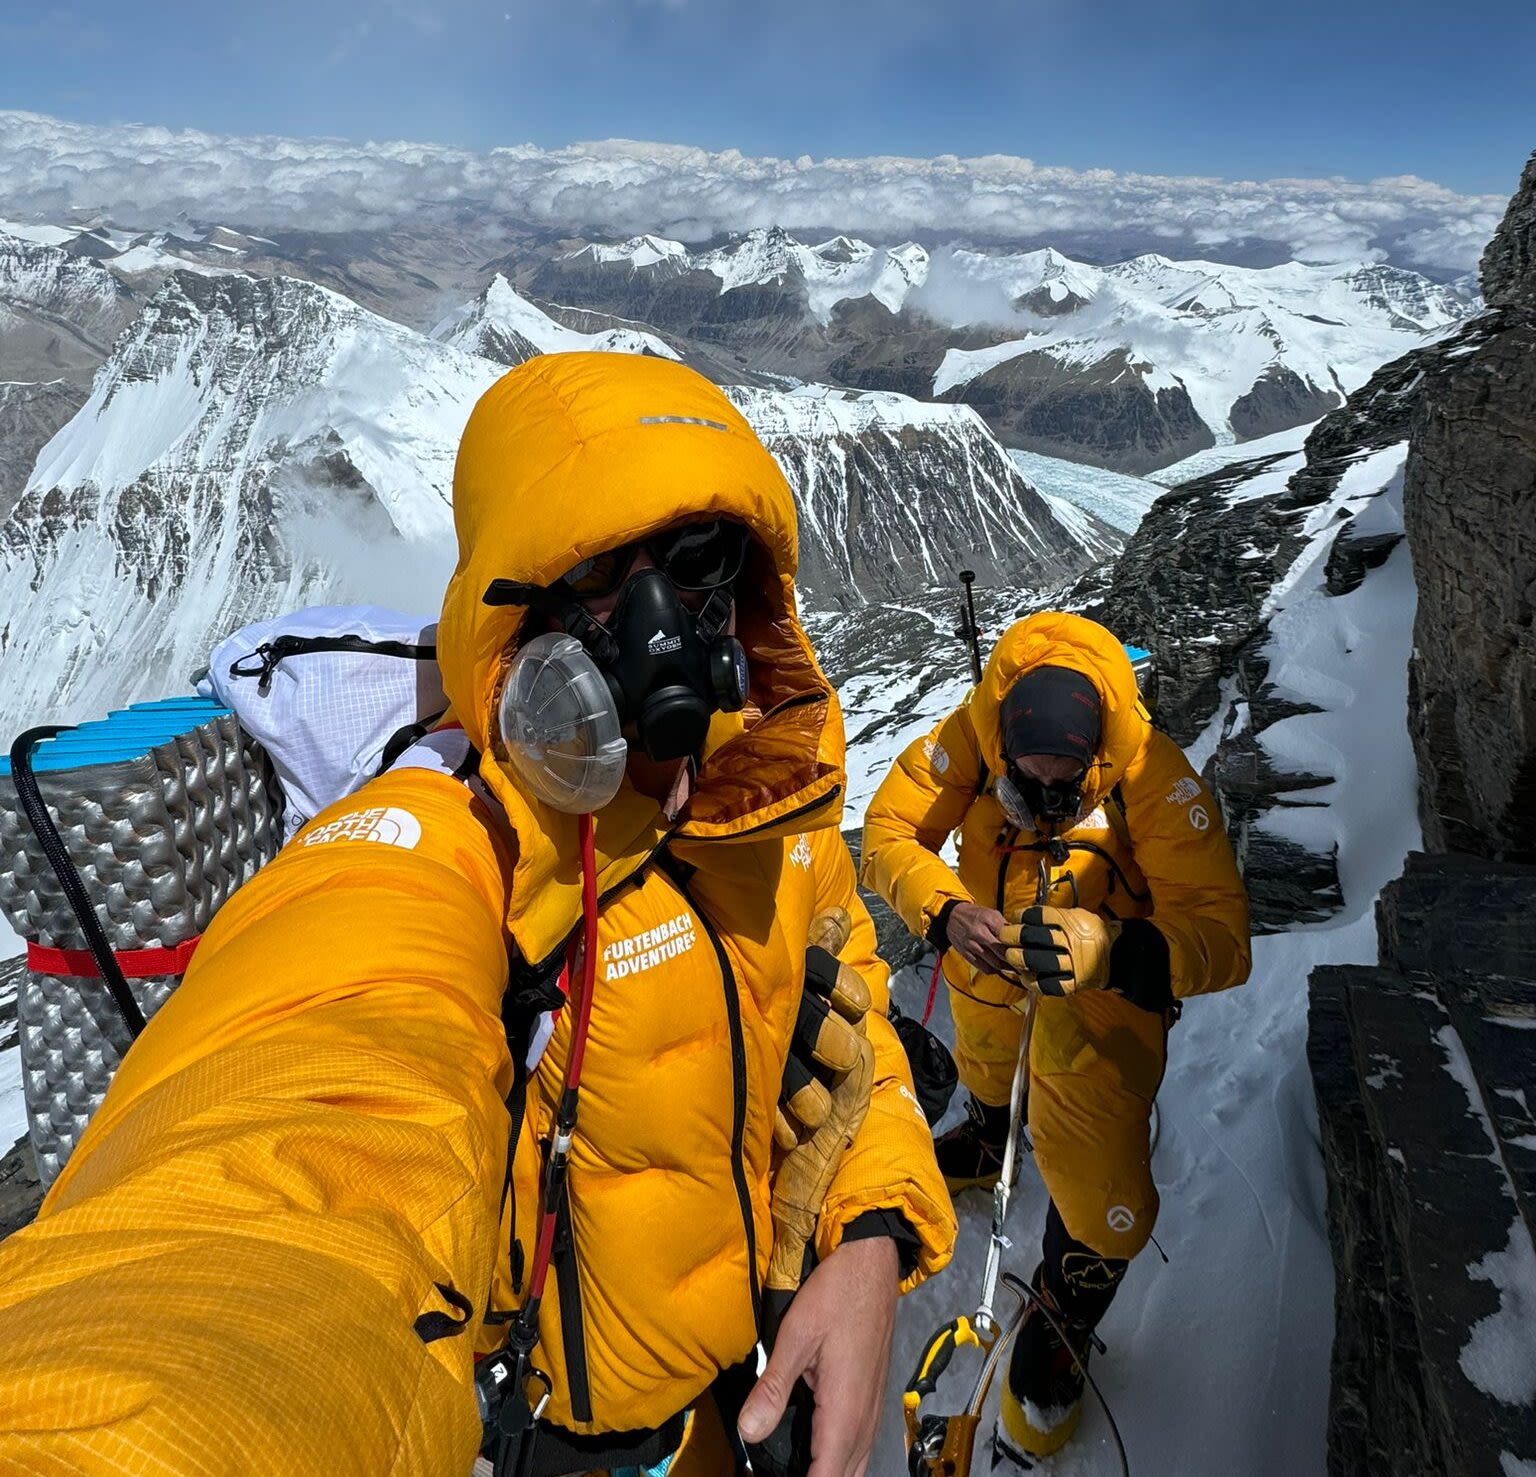 Everest North Side: One Small Team Heads For the Summit